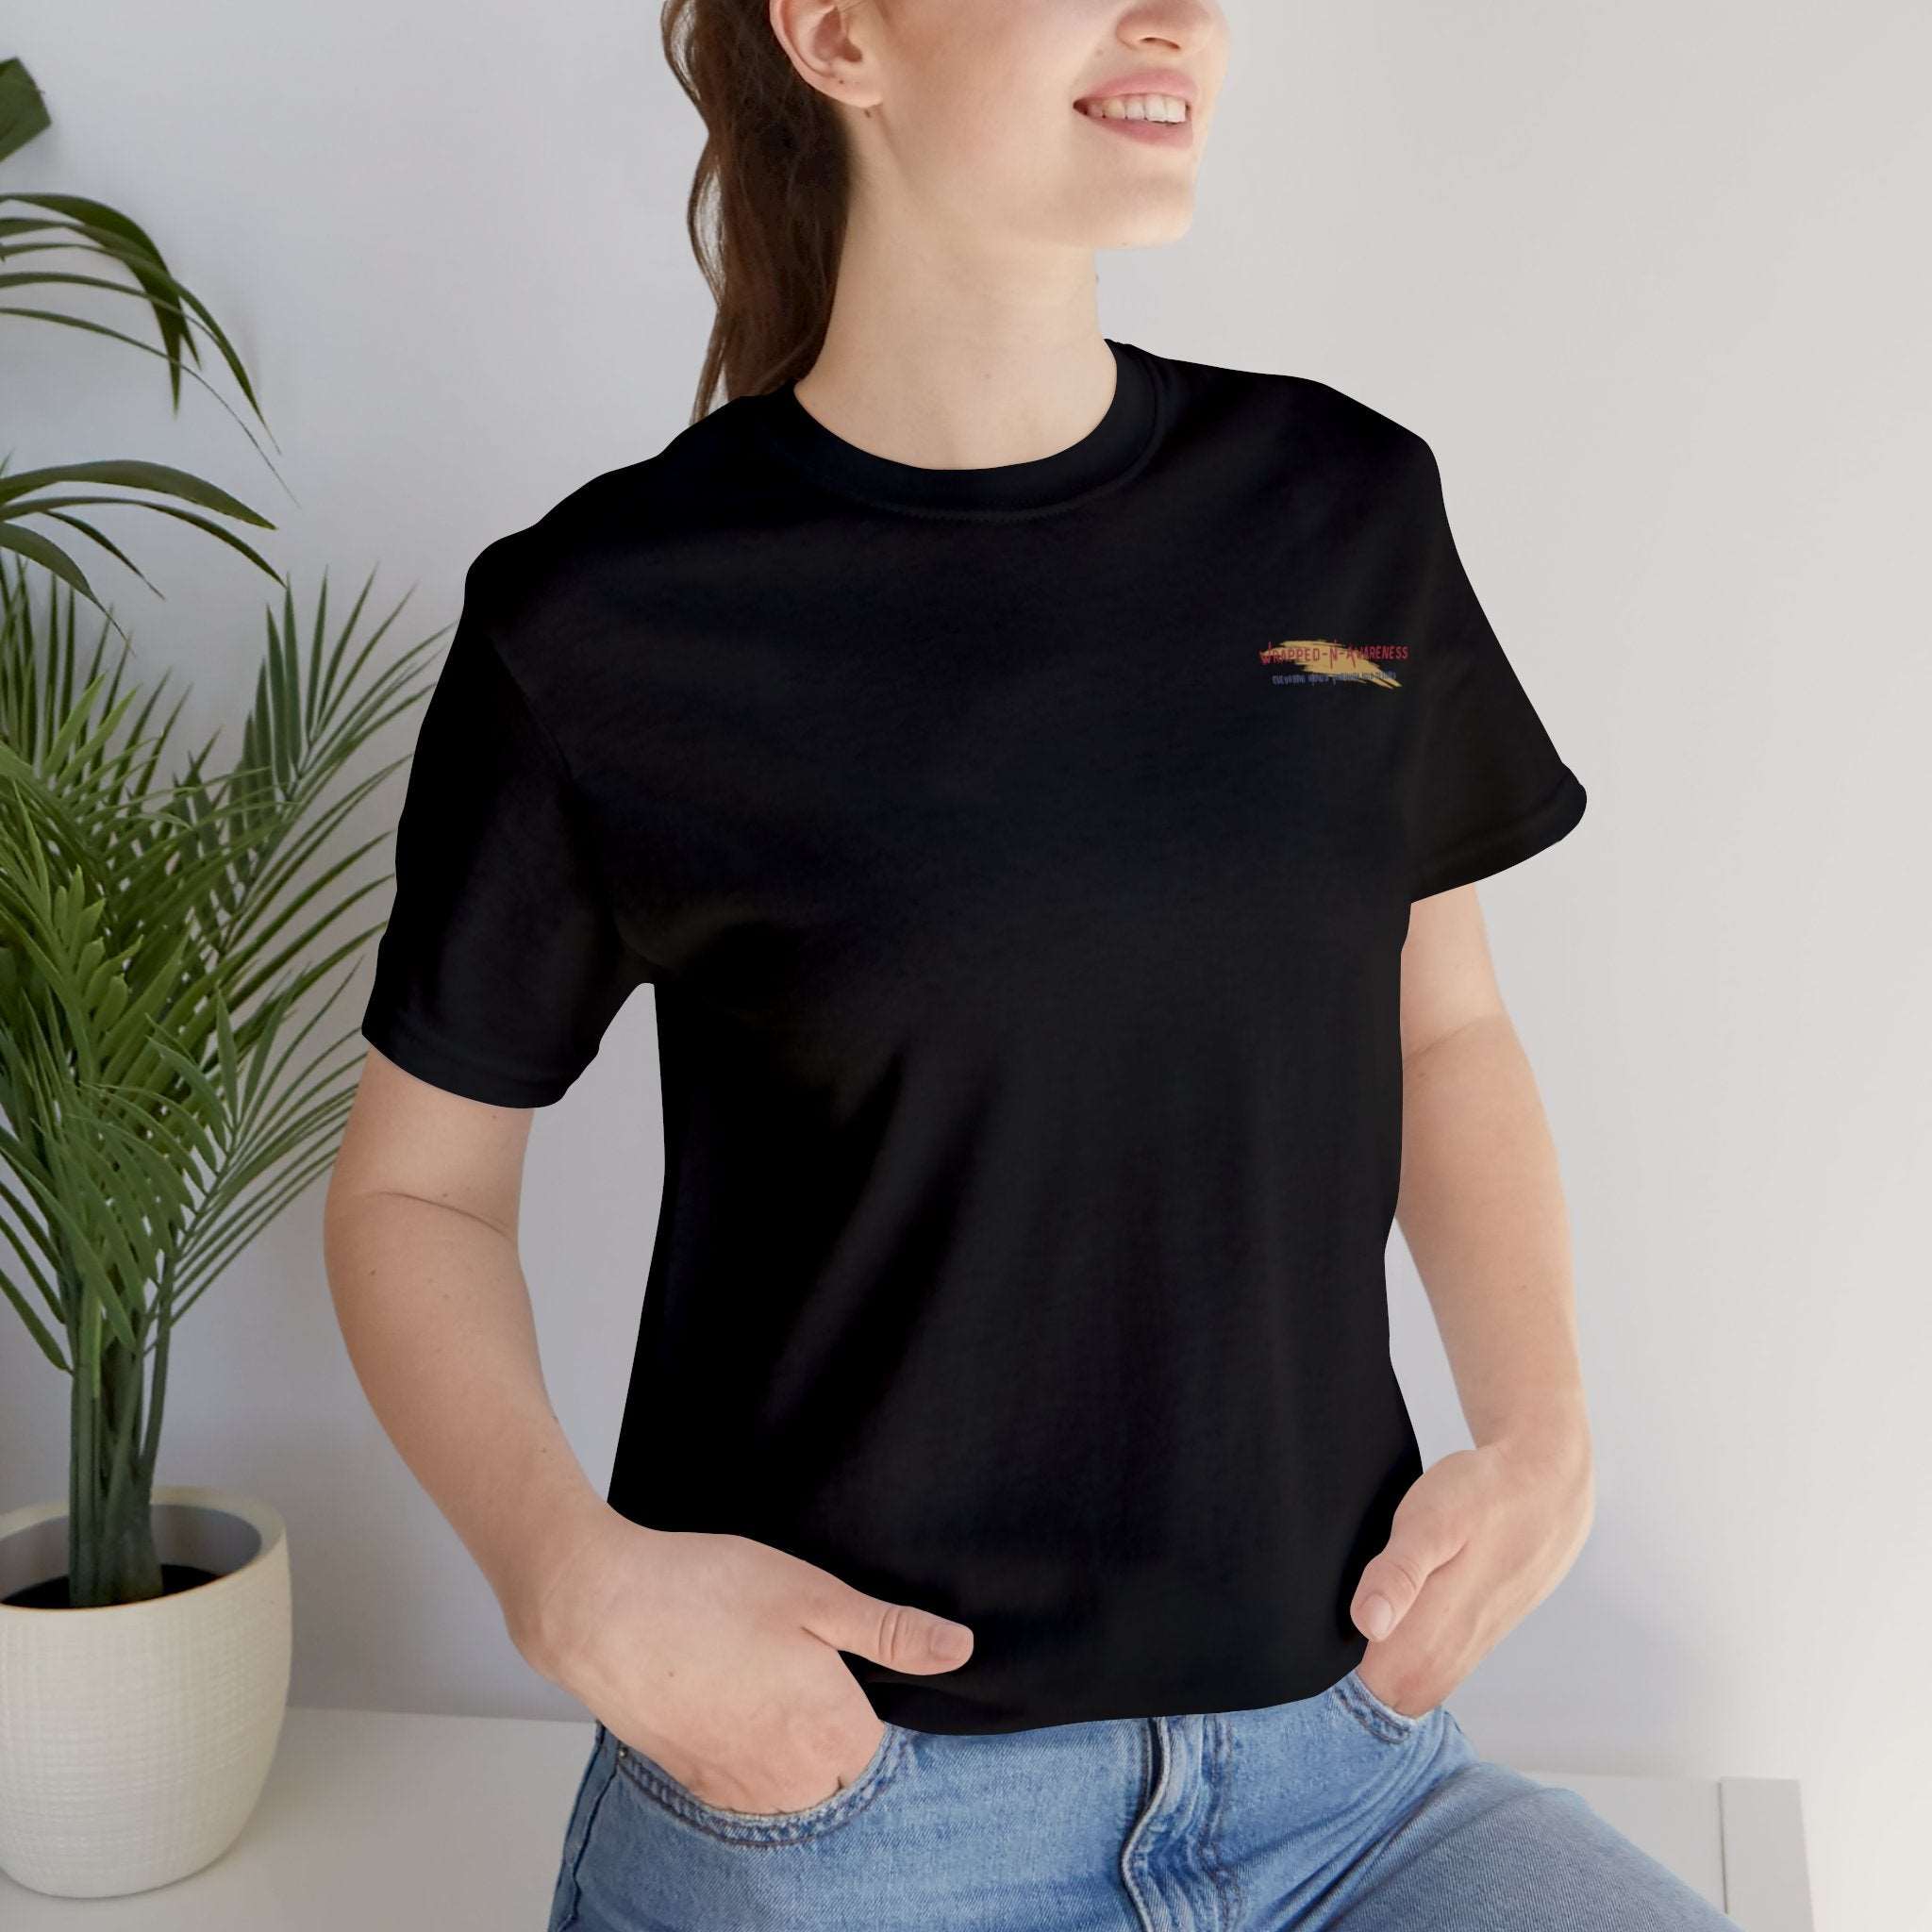 Espresso Yourself Jersey Tee - Bella+Canvas 3001 Team Purple Classic Tee Comfortable Tee Cotton T-Shirt Graphic Tee JerseyTee Statement Shirt T-shirt Tee Unisex Apparel T-Shirt 2875657649187144231_2048_46ae84bd-1a4a-4722-94ee-5bf2a4ab1e4e Printify